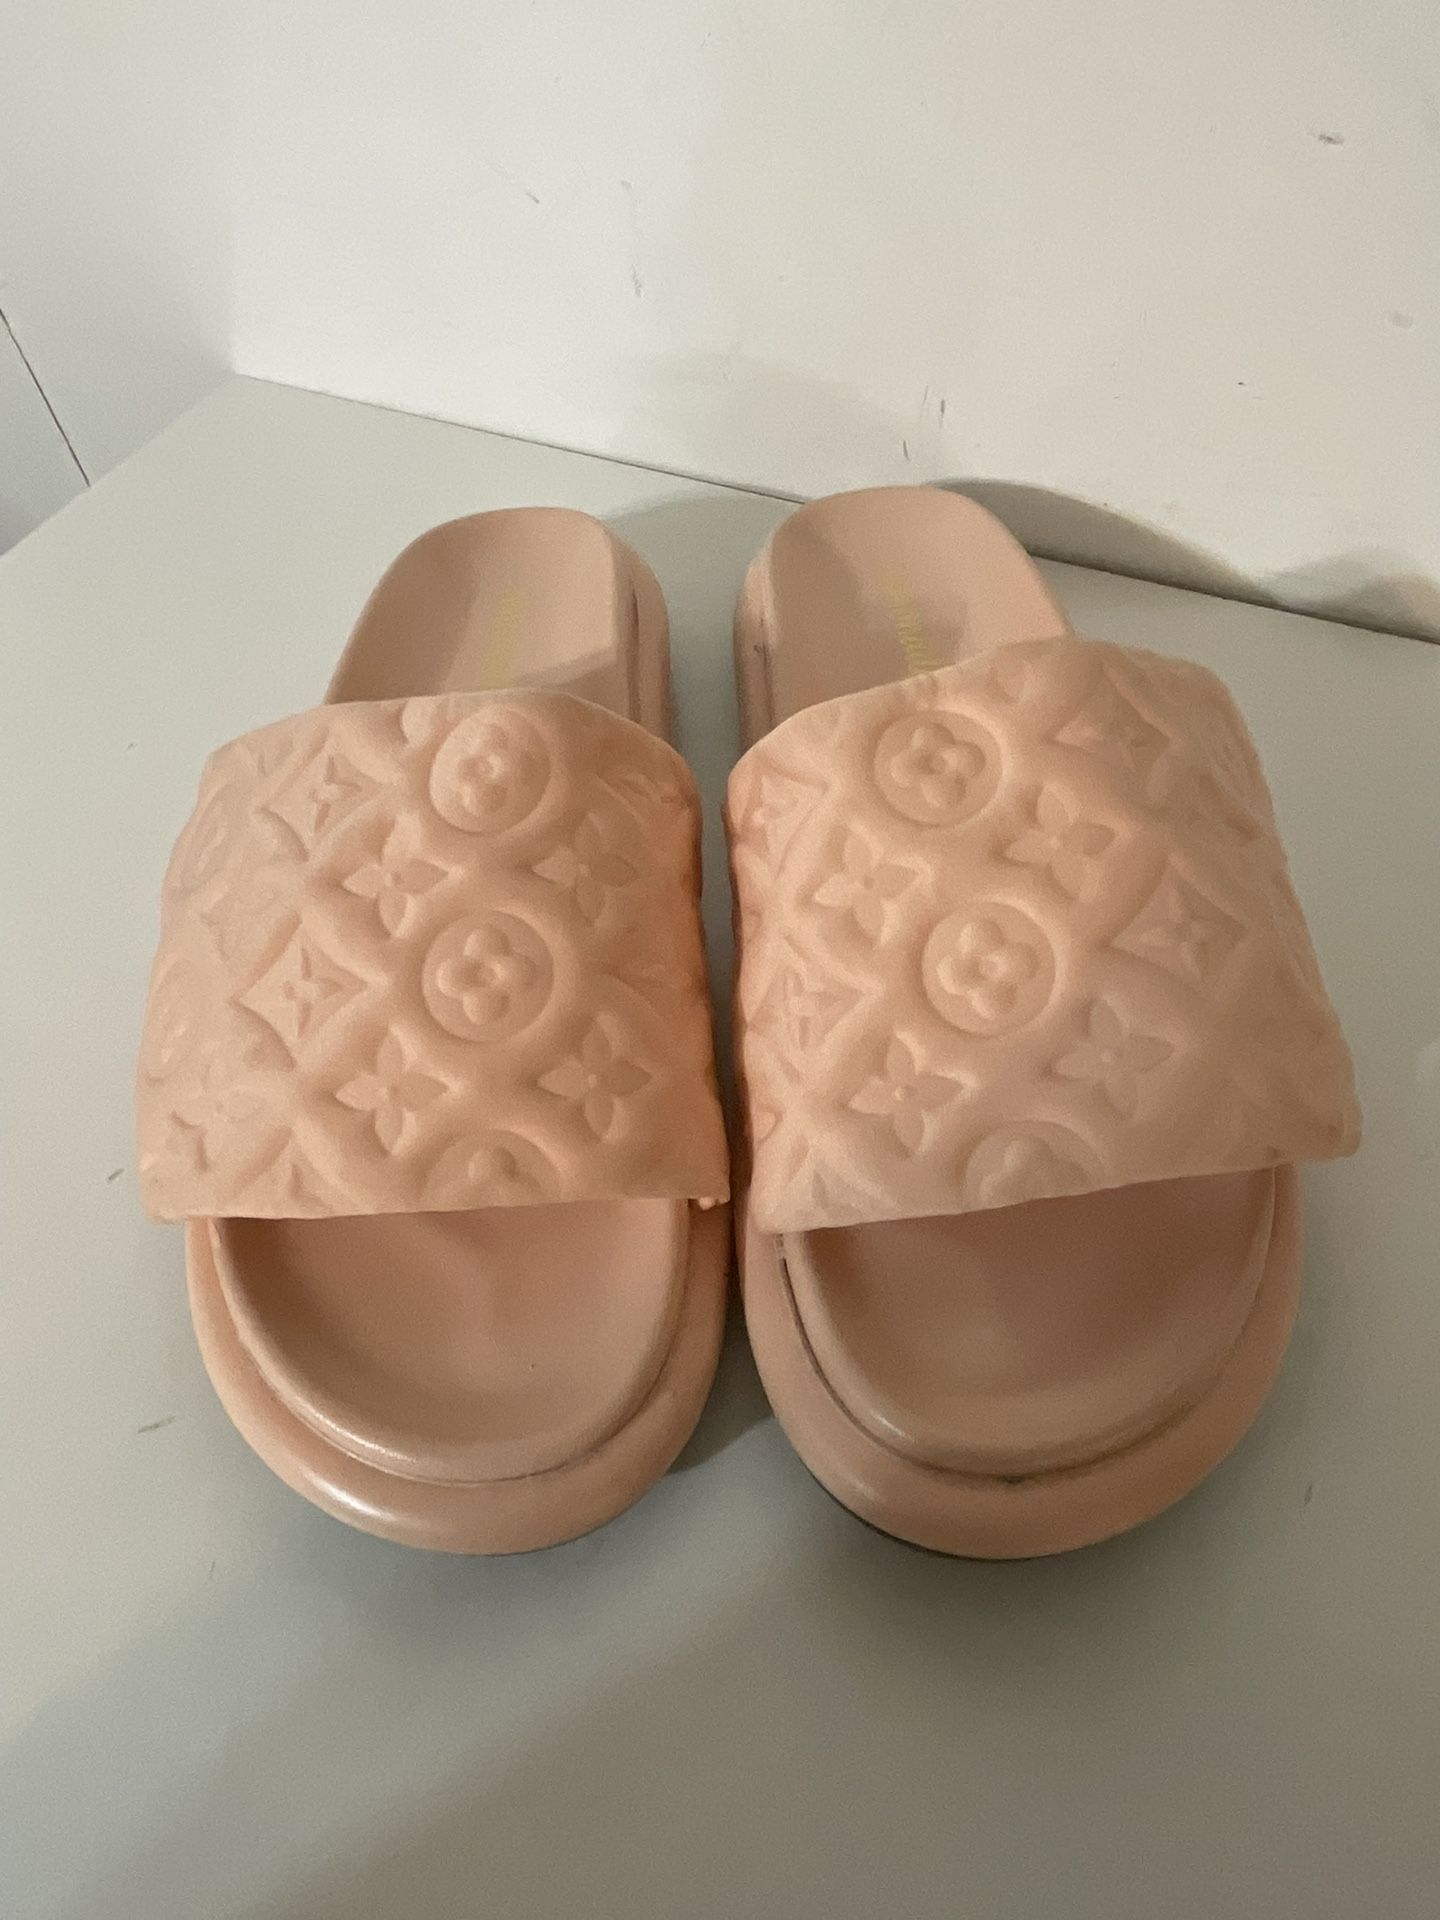 Cute Slides Never Used Size 8 Peach Color